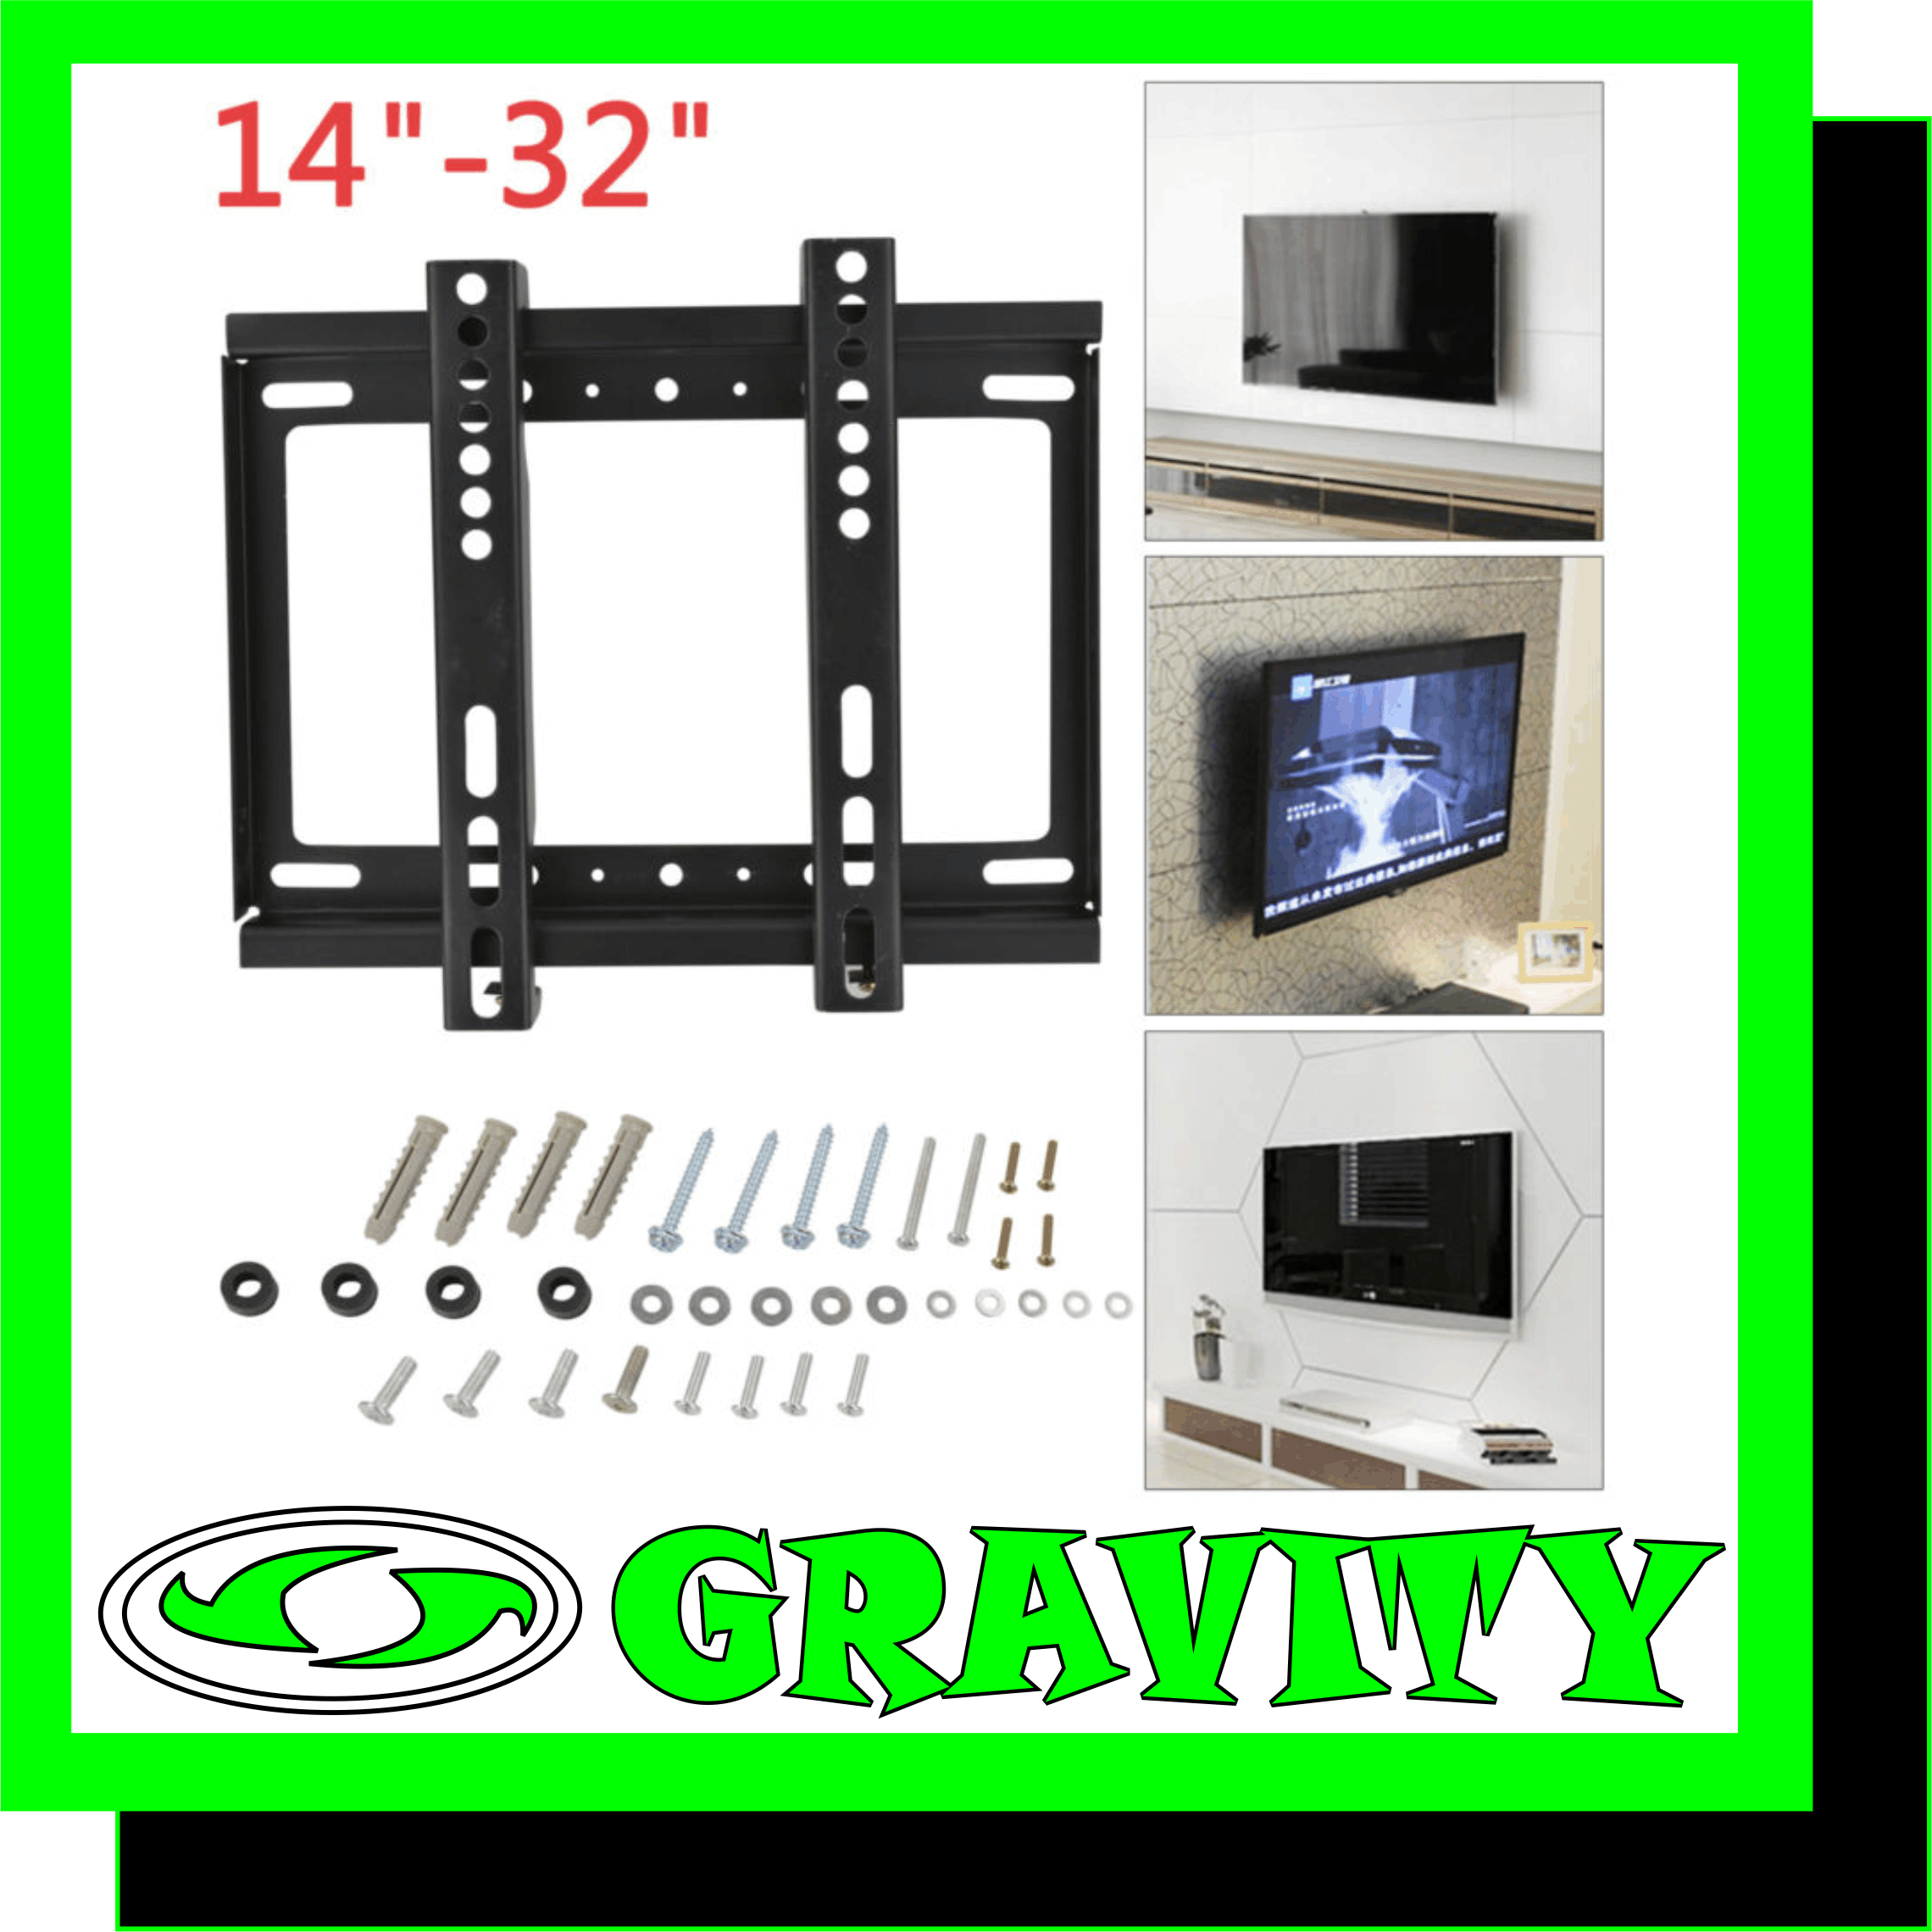 -Applicable Size: 14-32 inches   -Firmly mounts to any solid wall.  -Quick and easy to install,comes with full instructions and FREE fitting hardware  -fixings pack : including universal VESA screws  -Style/Adjustment:Flat/Fixed